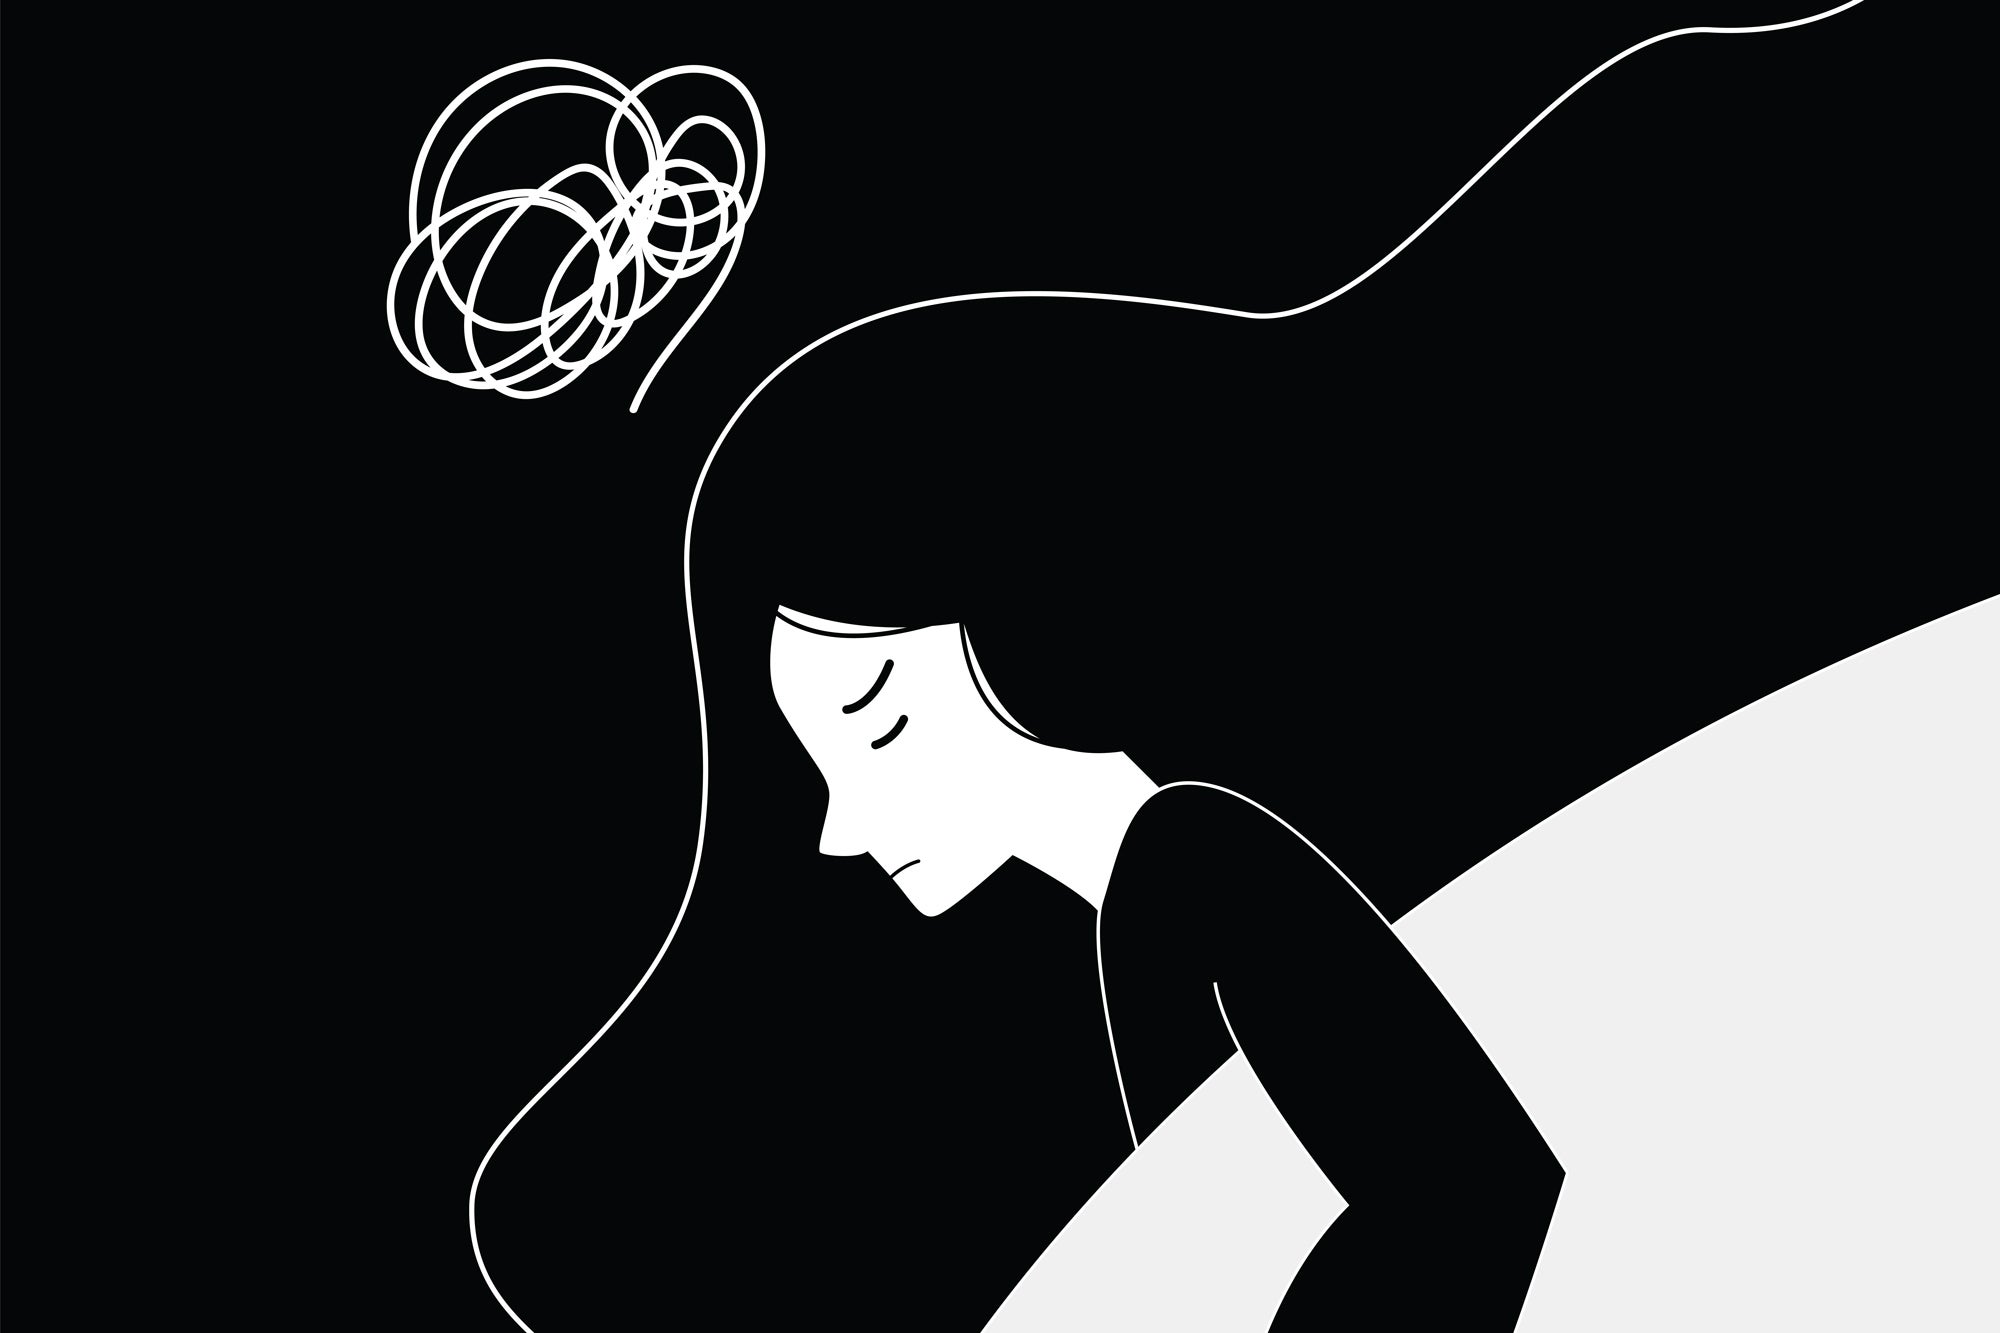 Simple black and white vector illustration depicting a woman in bed, eyes closed, sleeping, with a white line scribble above her head